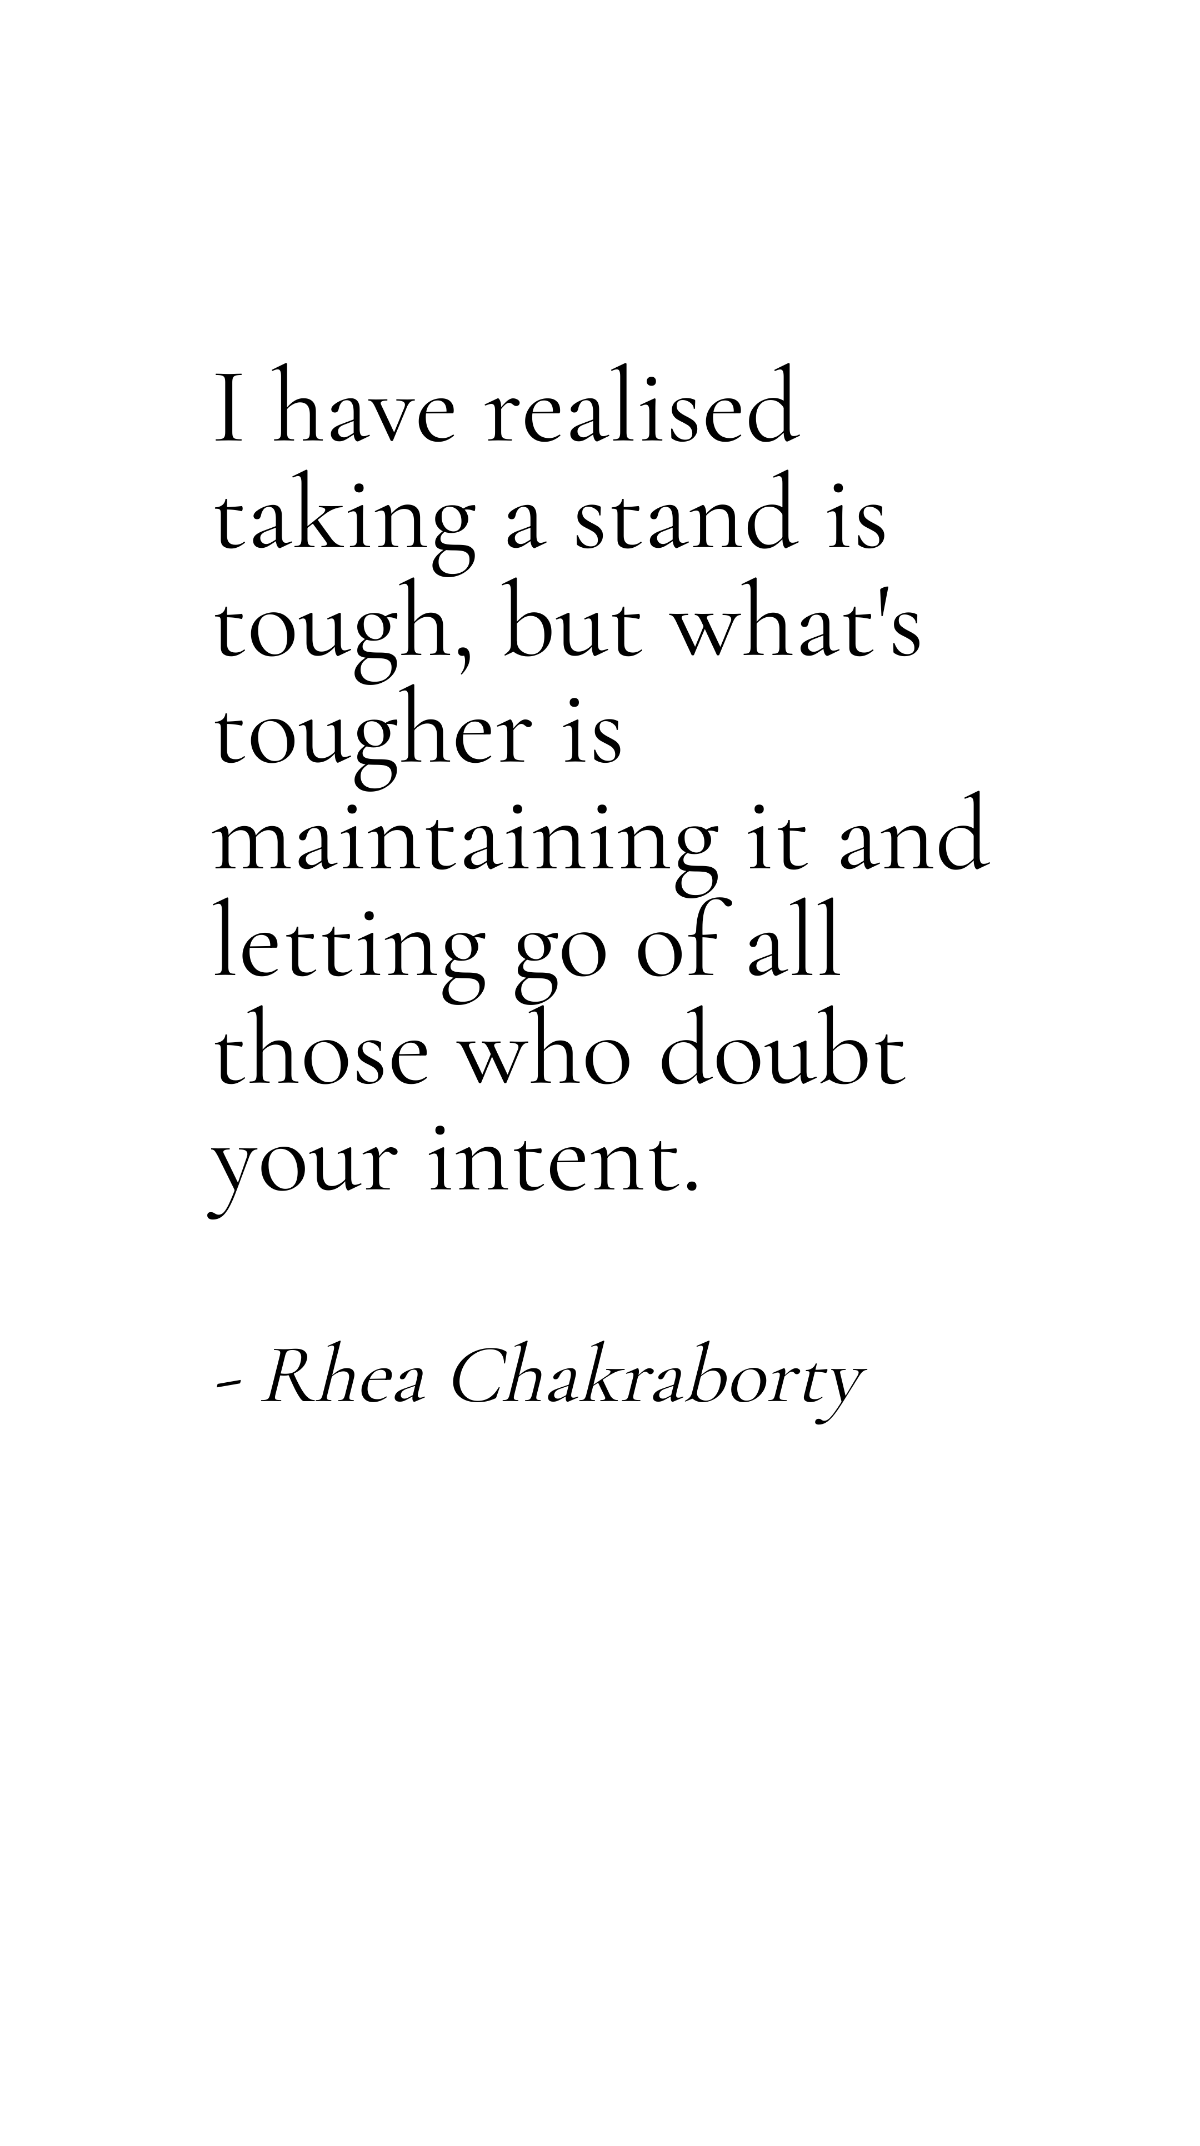 Rhea Chakraborty - I have realised taking a stand is tough, but what's tougher is maintaining it and letting go of all those who doubt your intent. Template